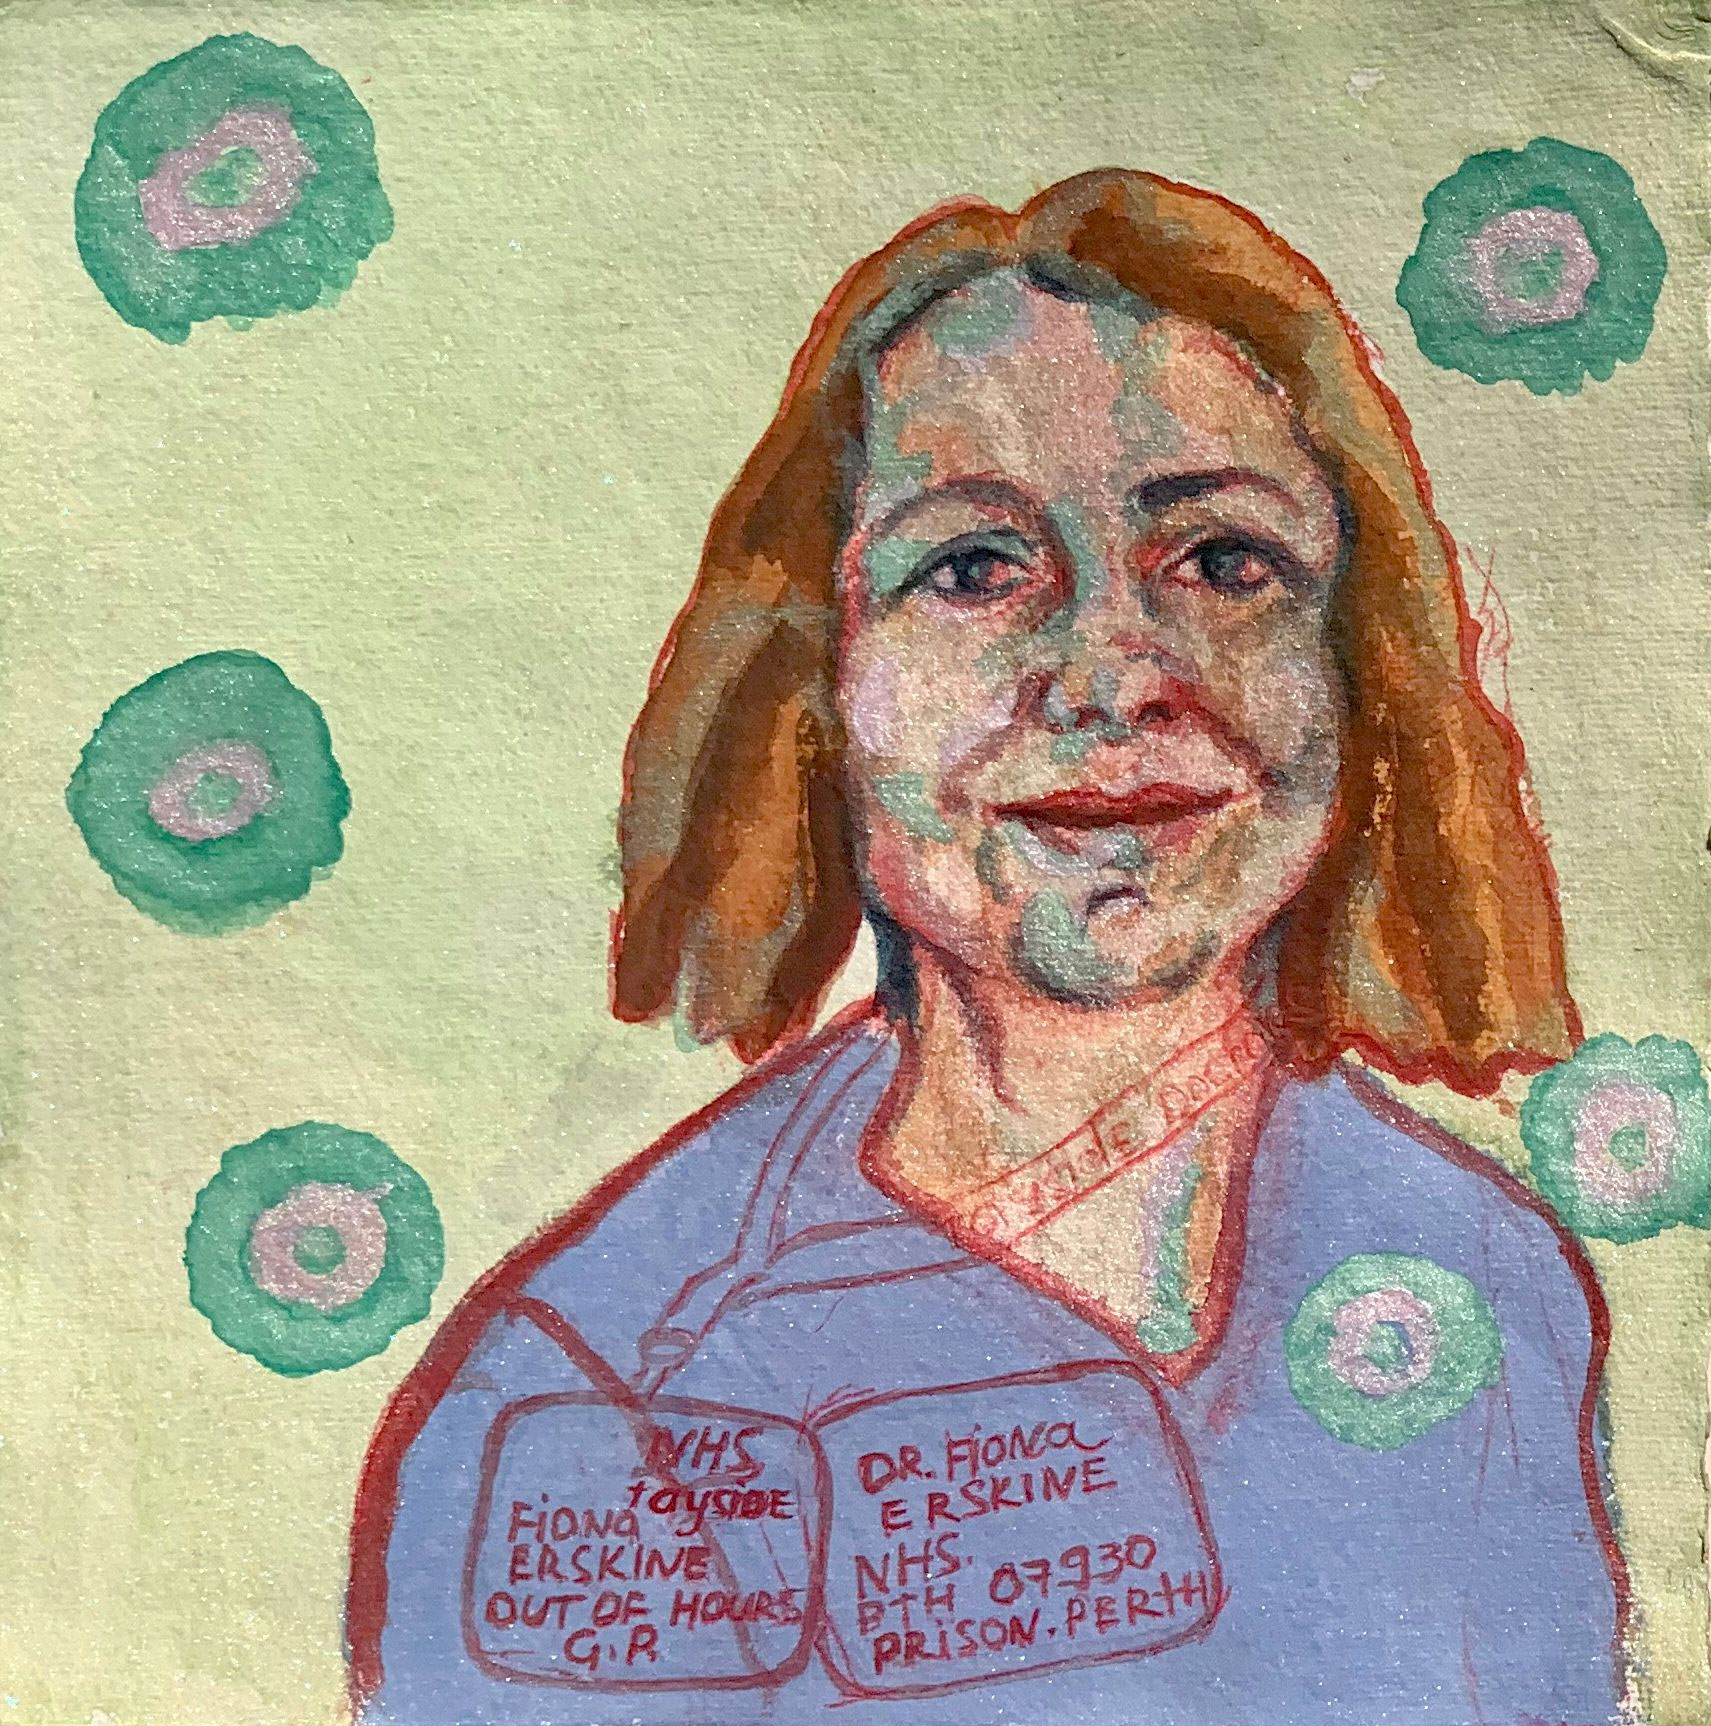 Dr. Fiona Erskine, 1, 2020, 8.5″ by 8.5″, watercolor on rag paper